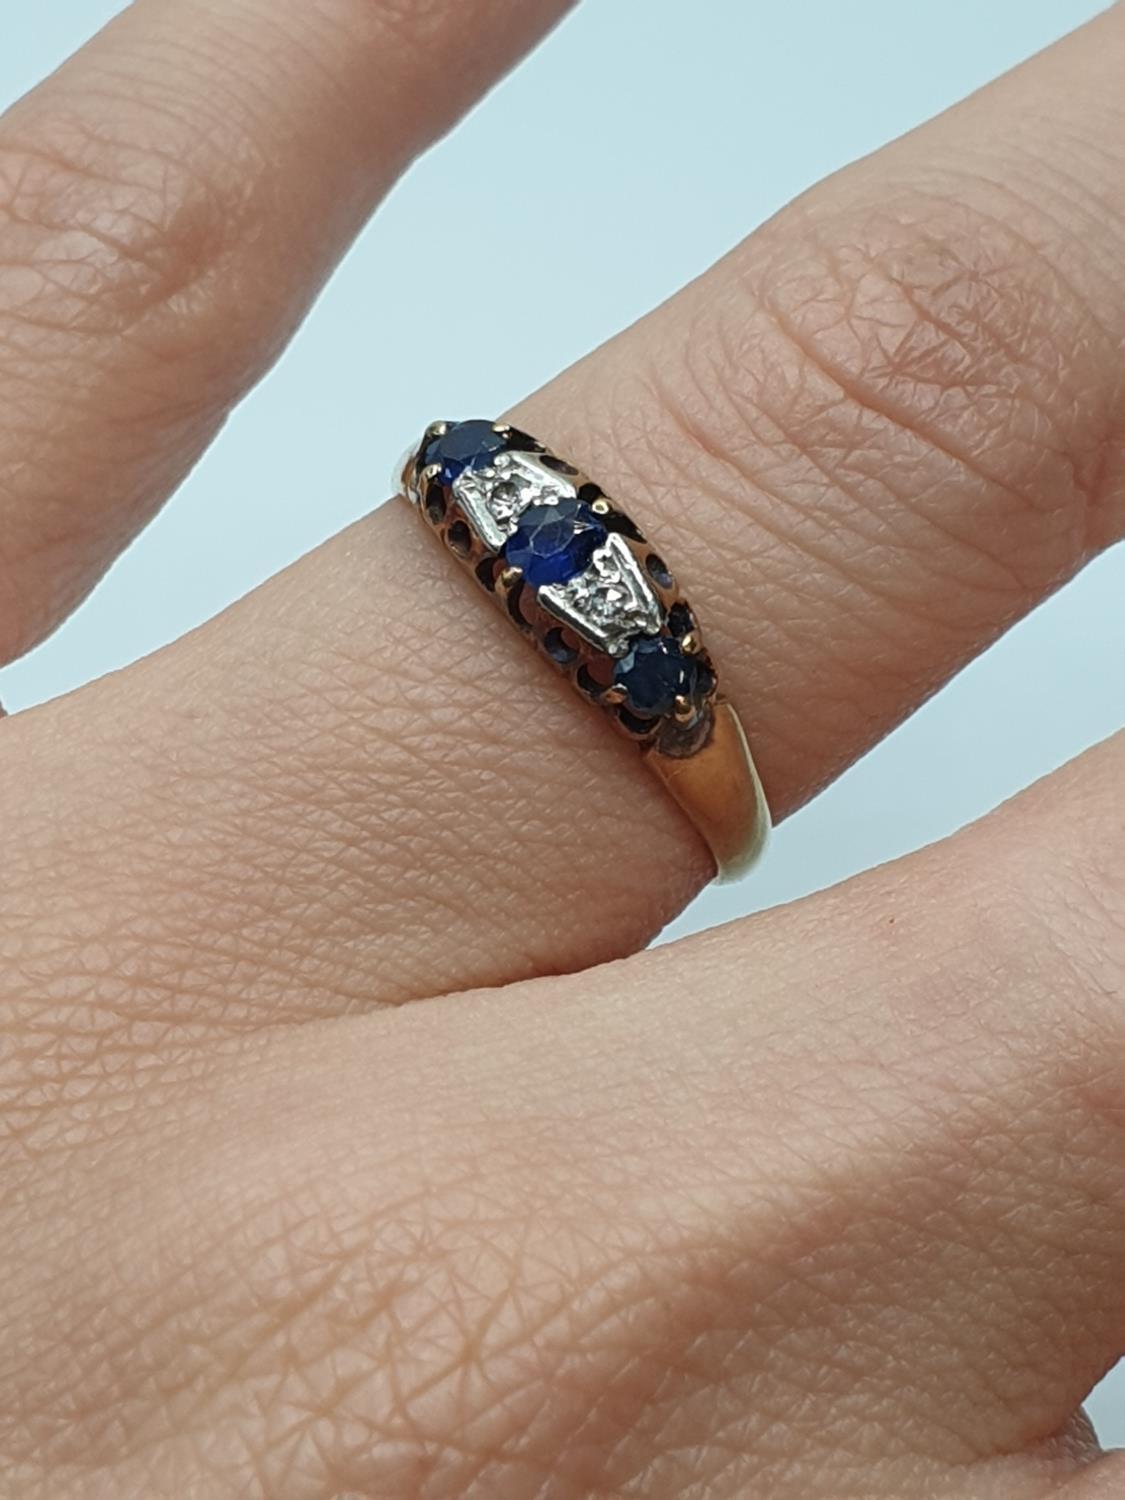 Antique 18ct Yellow Gold Diamond and Sapphire Ring, platinum mount, size M/N and weight 2g approx - Image 3 of 3